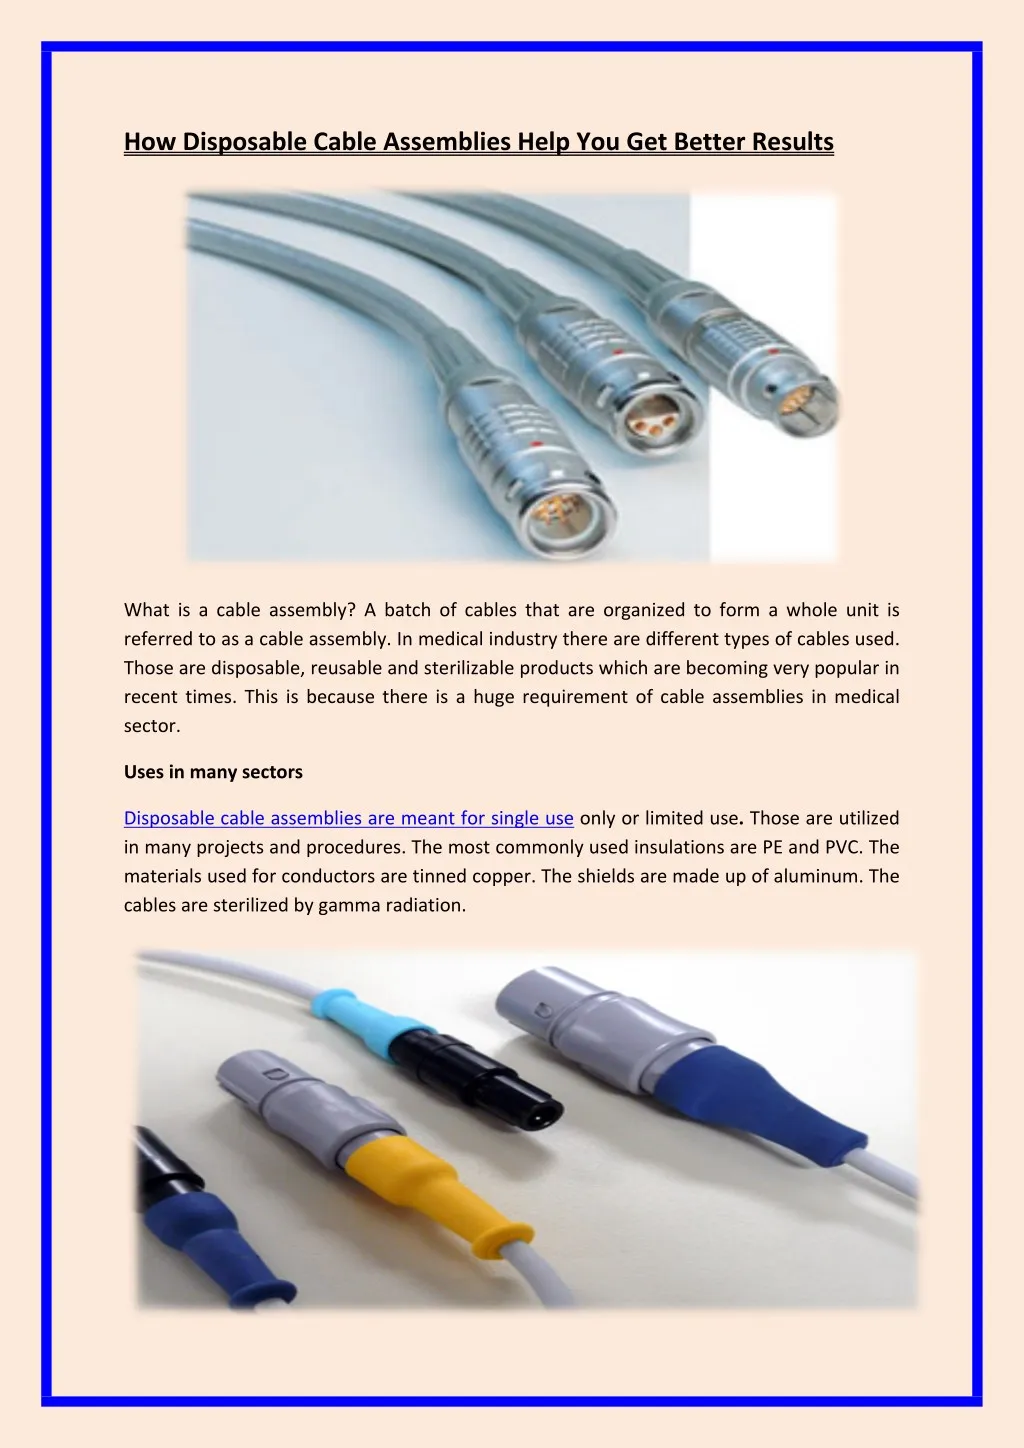 how disposable cable assemblies help